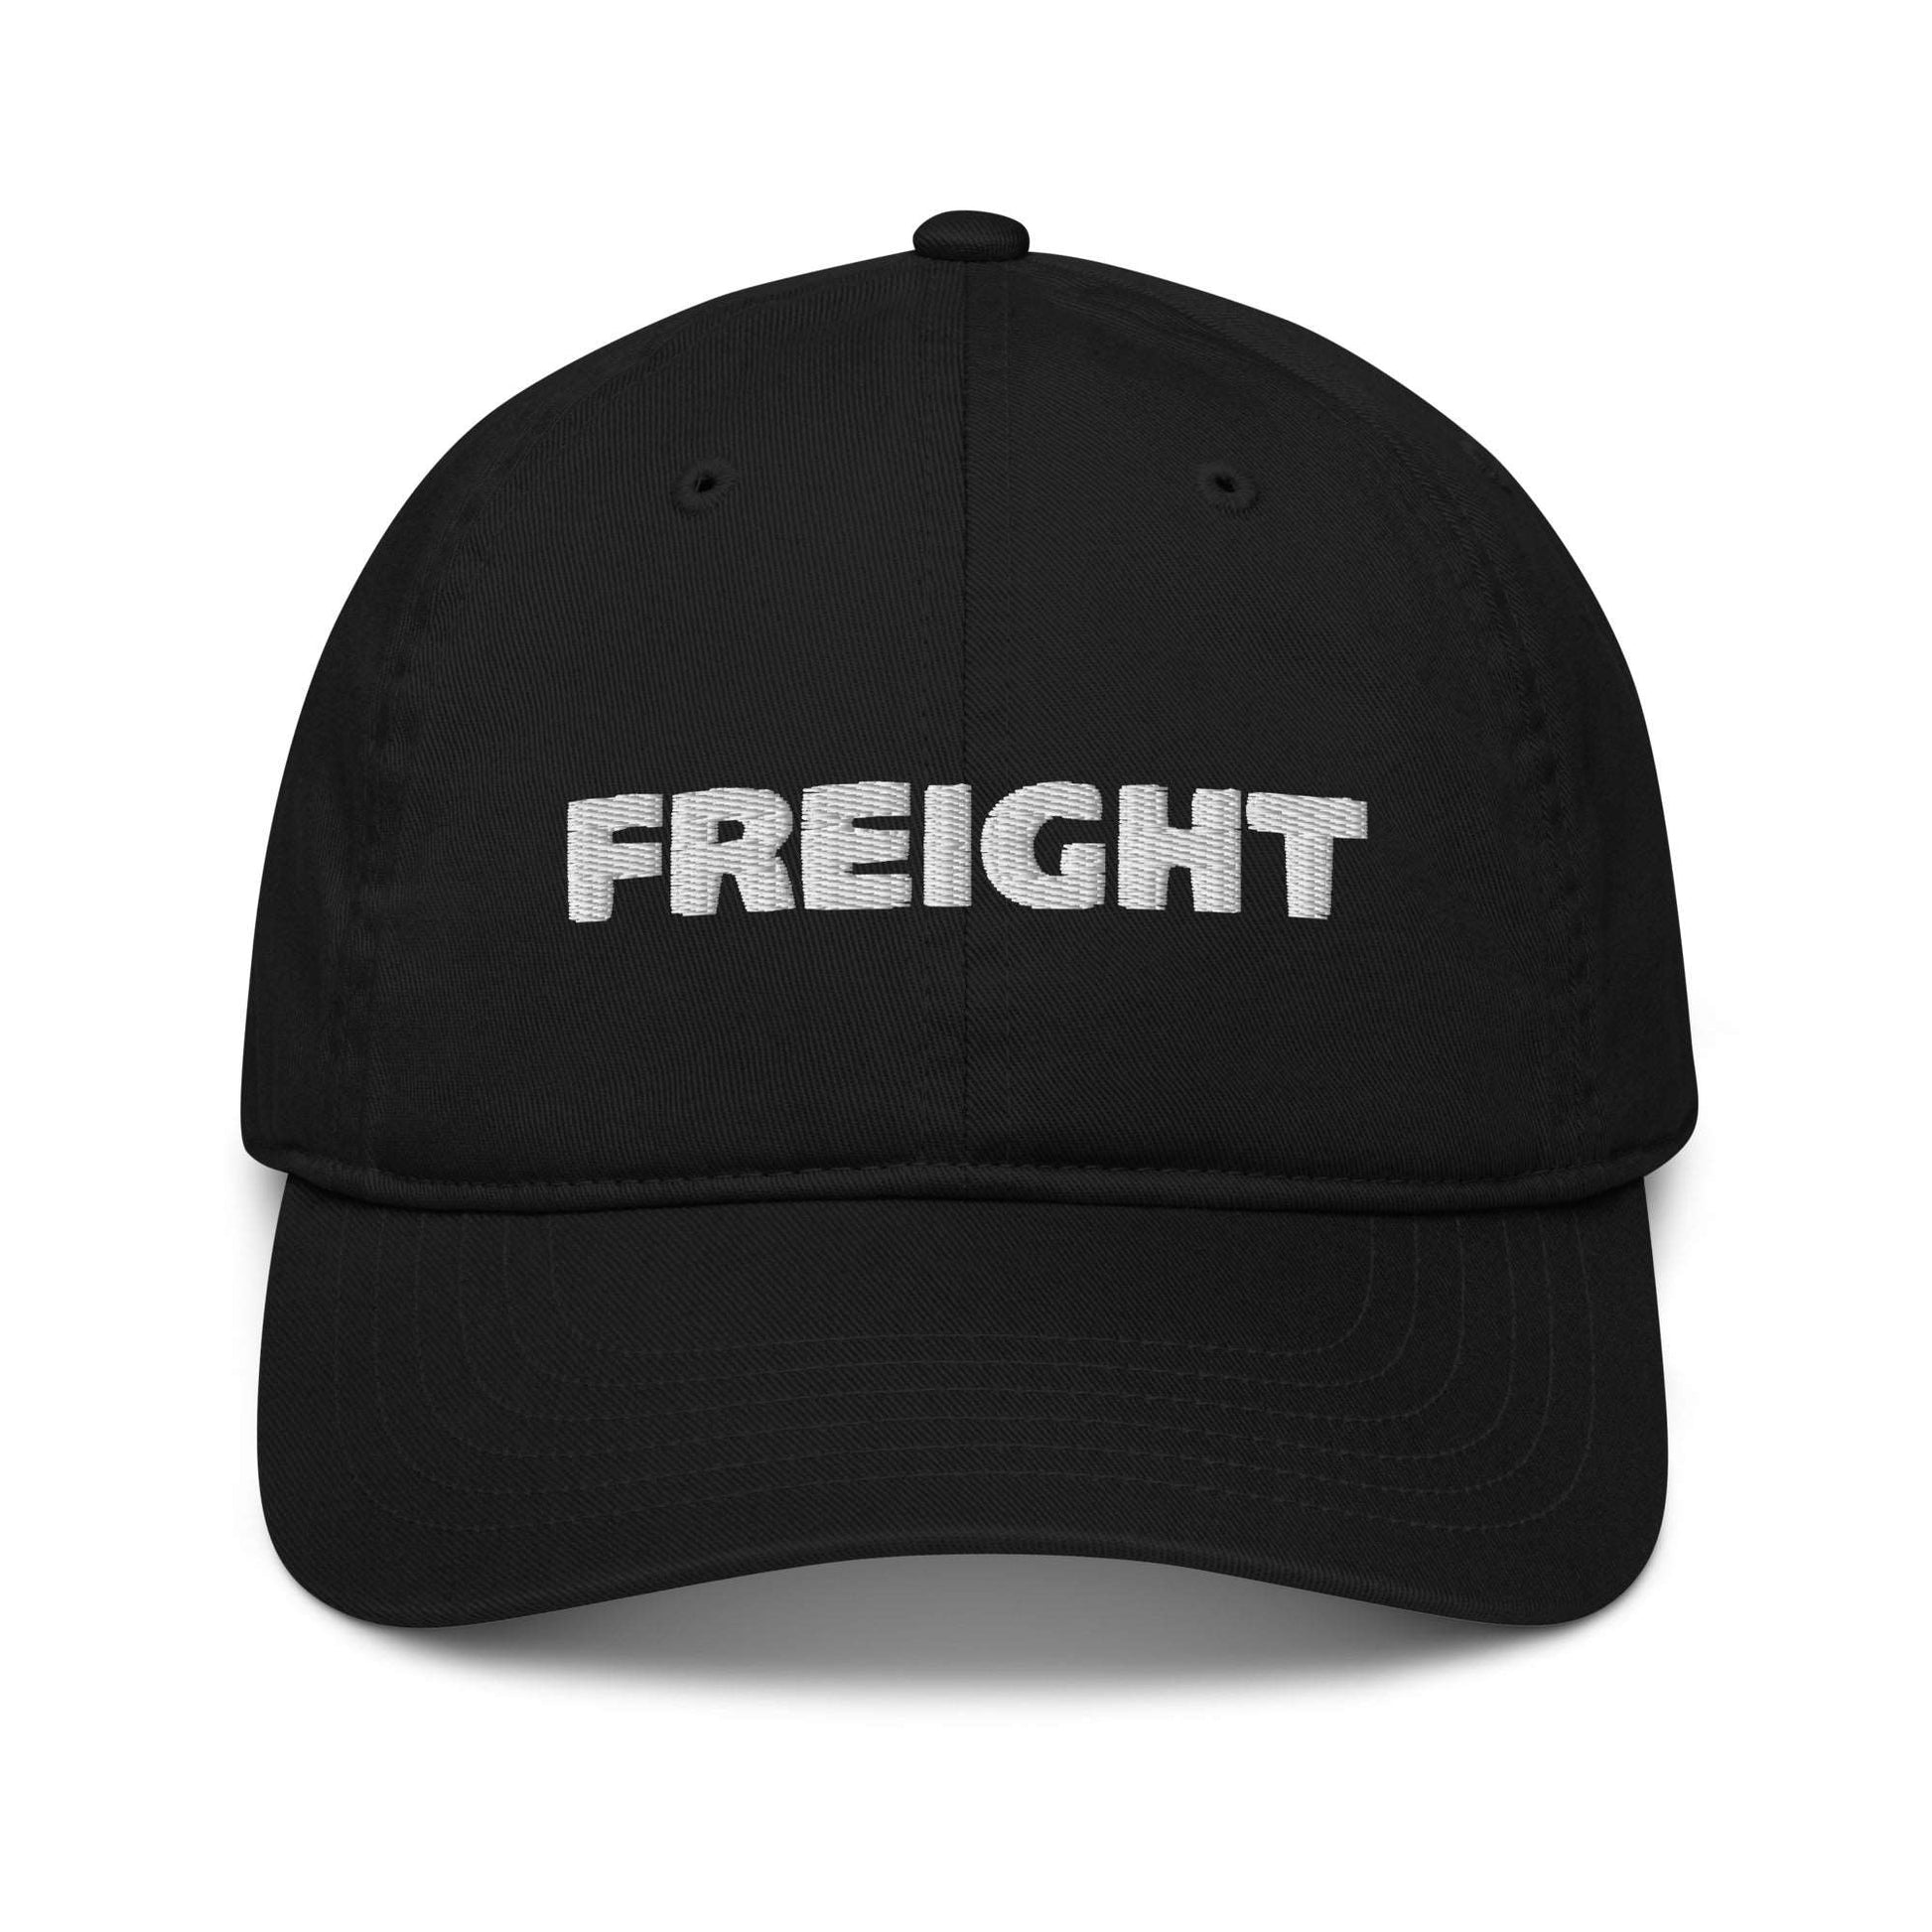 (Limited) Freight x Trxck Hat